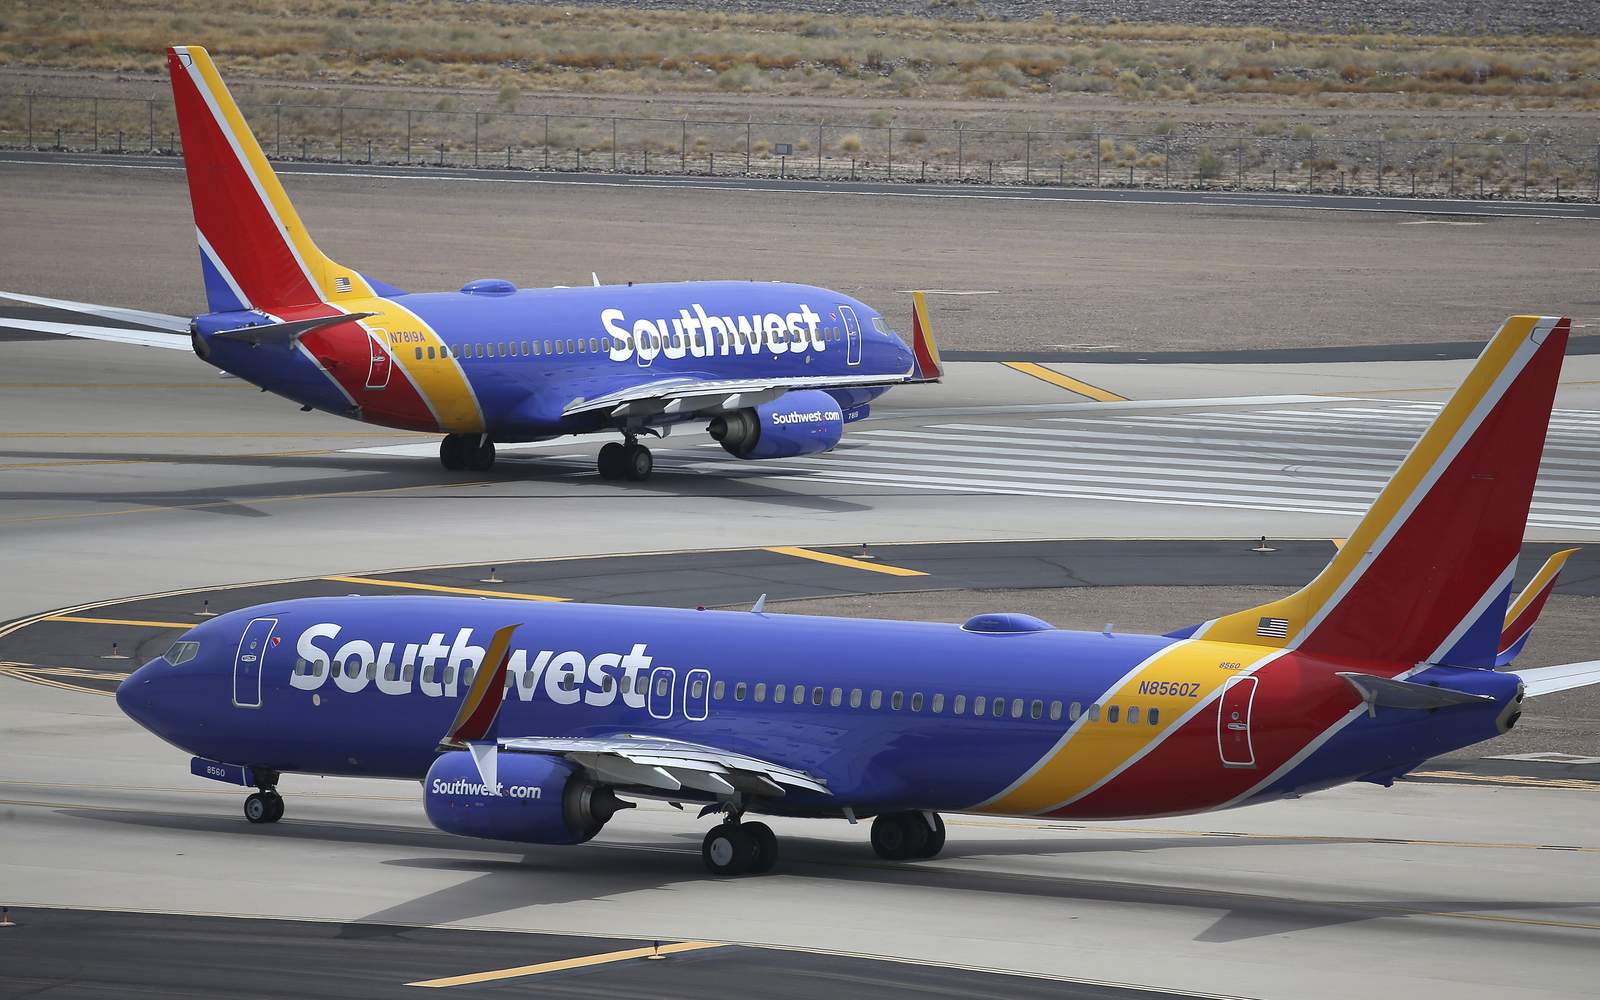 Southwest comes out on top in new airline survey